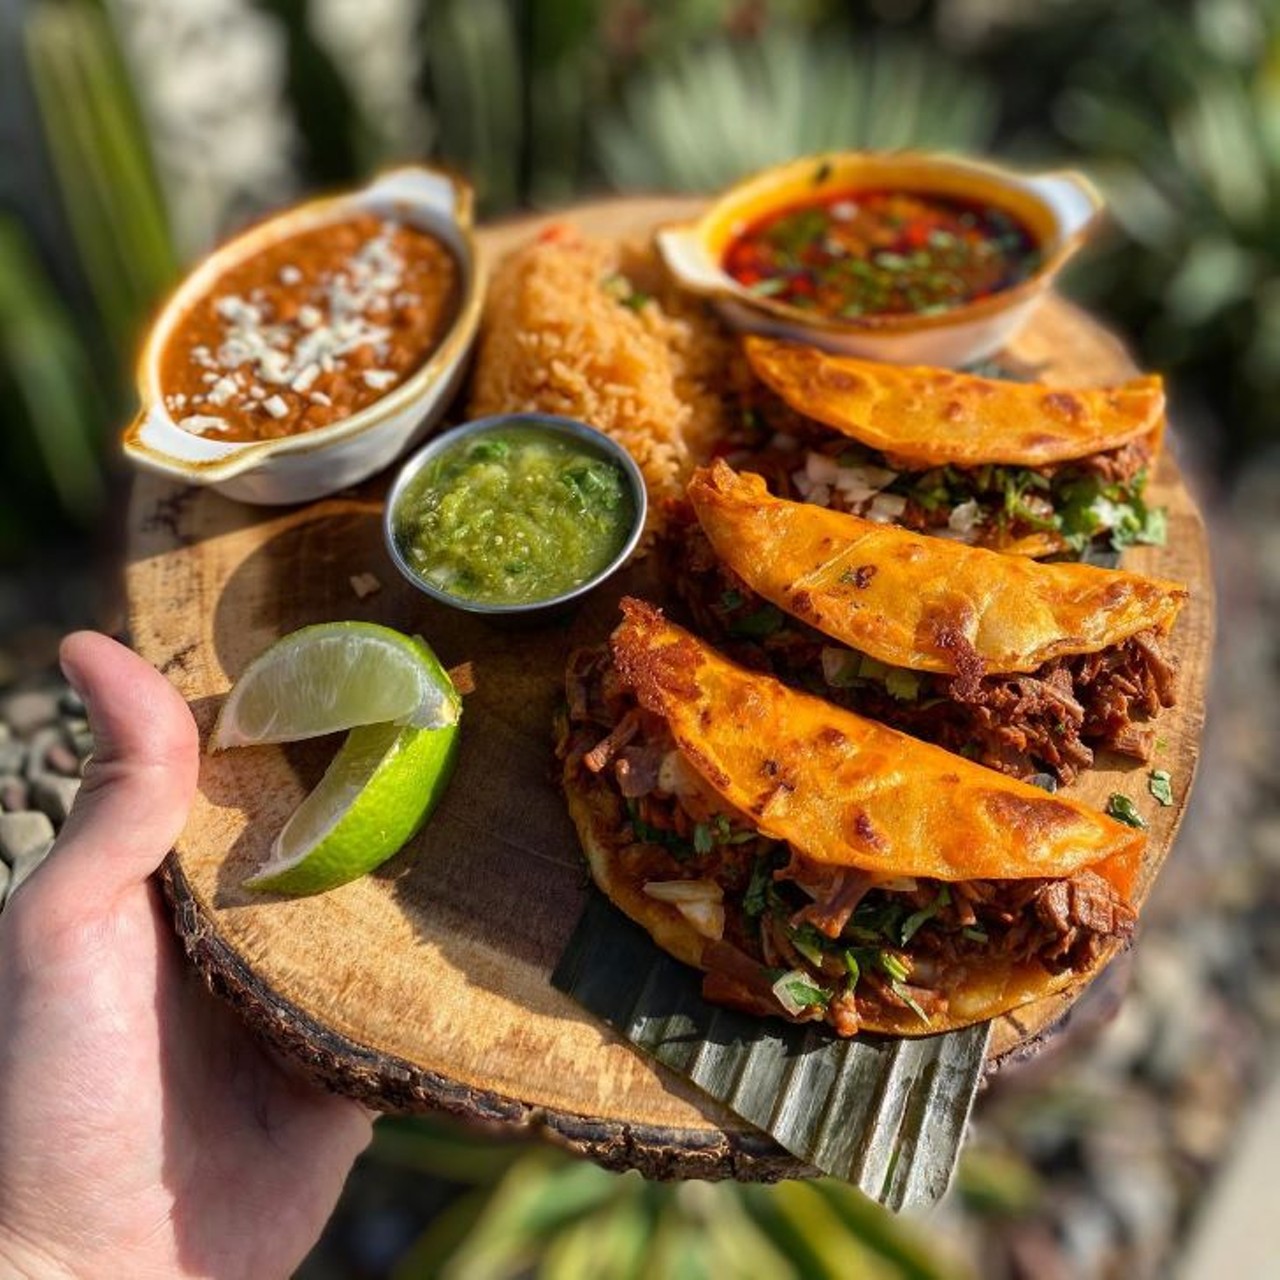 Agave Azul 
Multiple locations 
Agave Azul is serving modern Mexican cuisine, while using traditional flavors. Their 24-hour braised pork tacos and spicy chorizo are plates to look out for. 
Photo via Agave Azul/Facebook